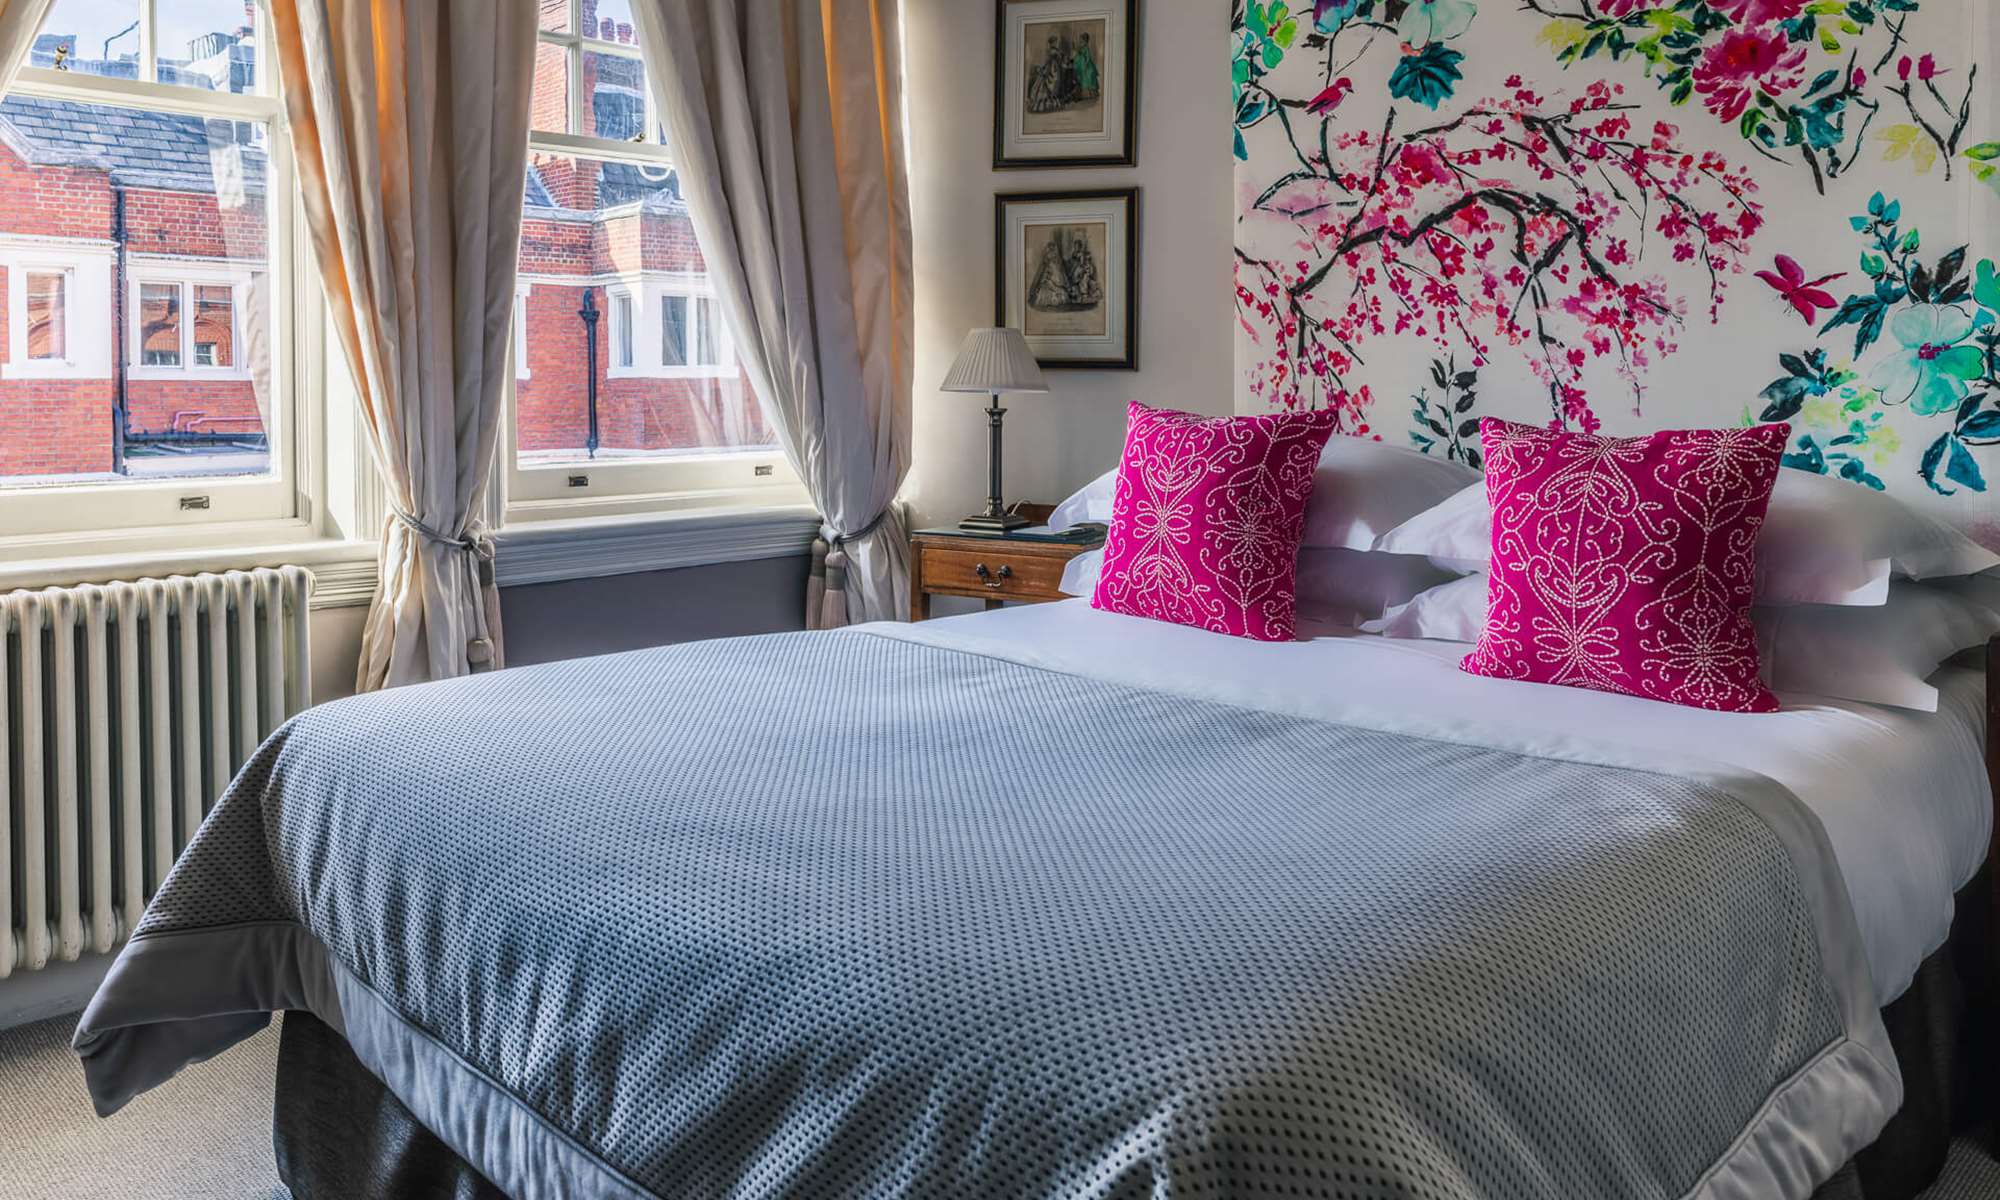 Double bed of the Petite Room at 11 Cadogan Gardens